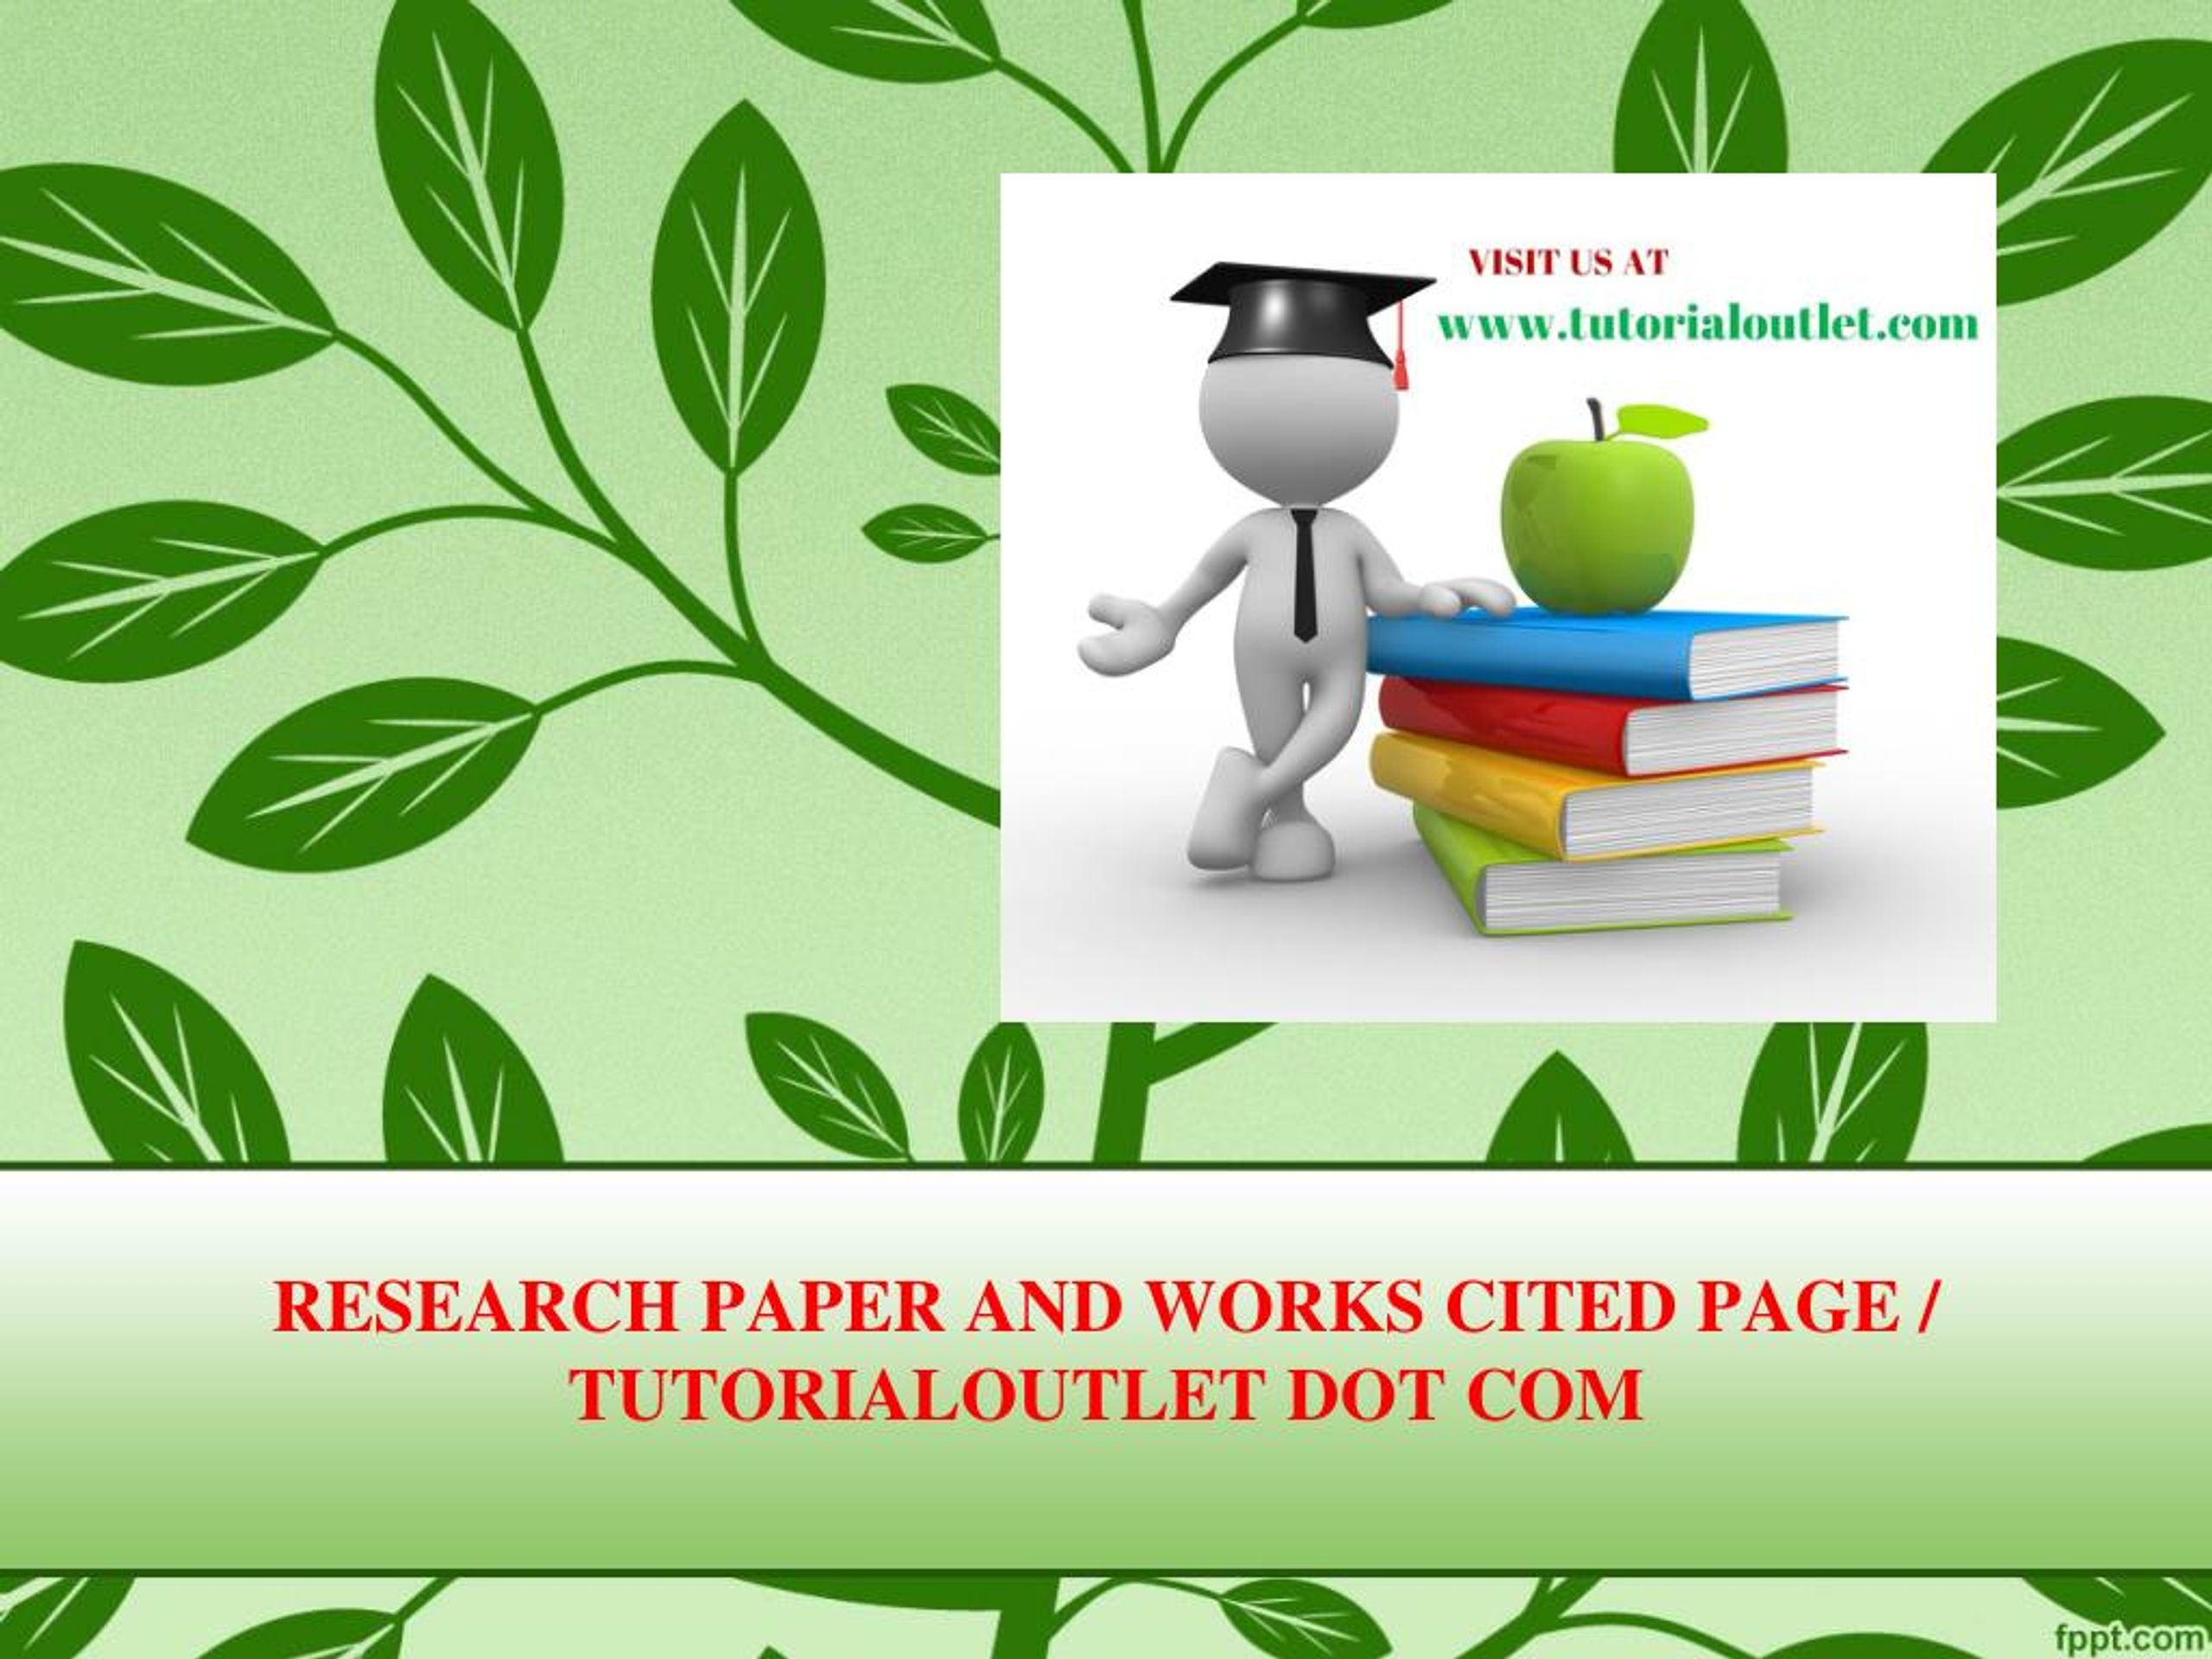 Research paper works cited page